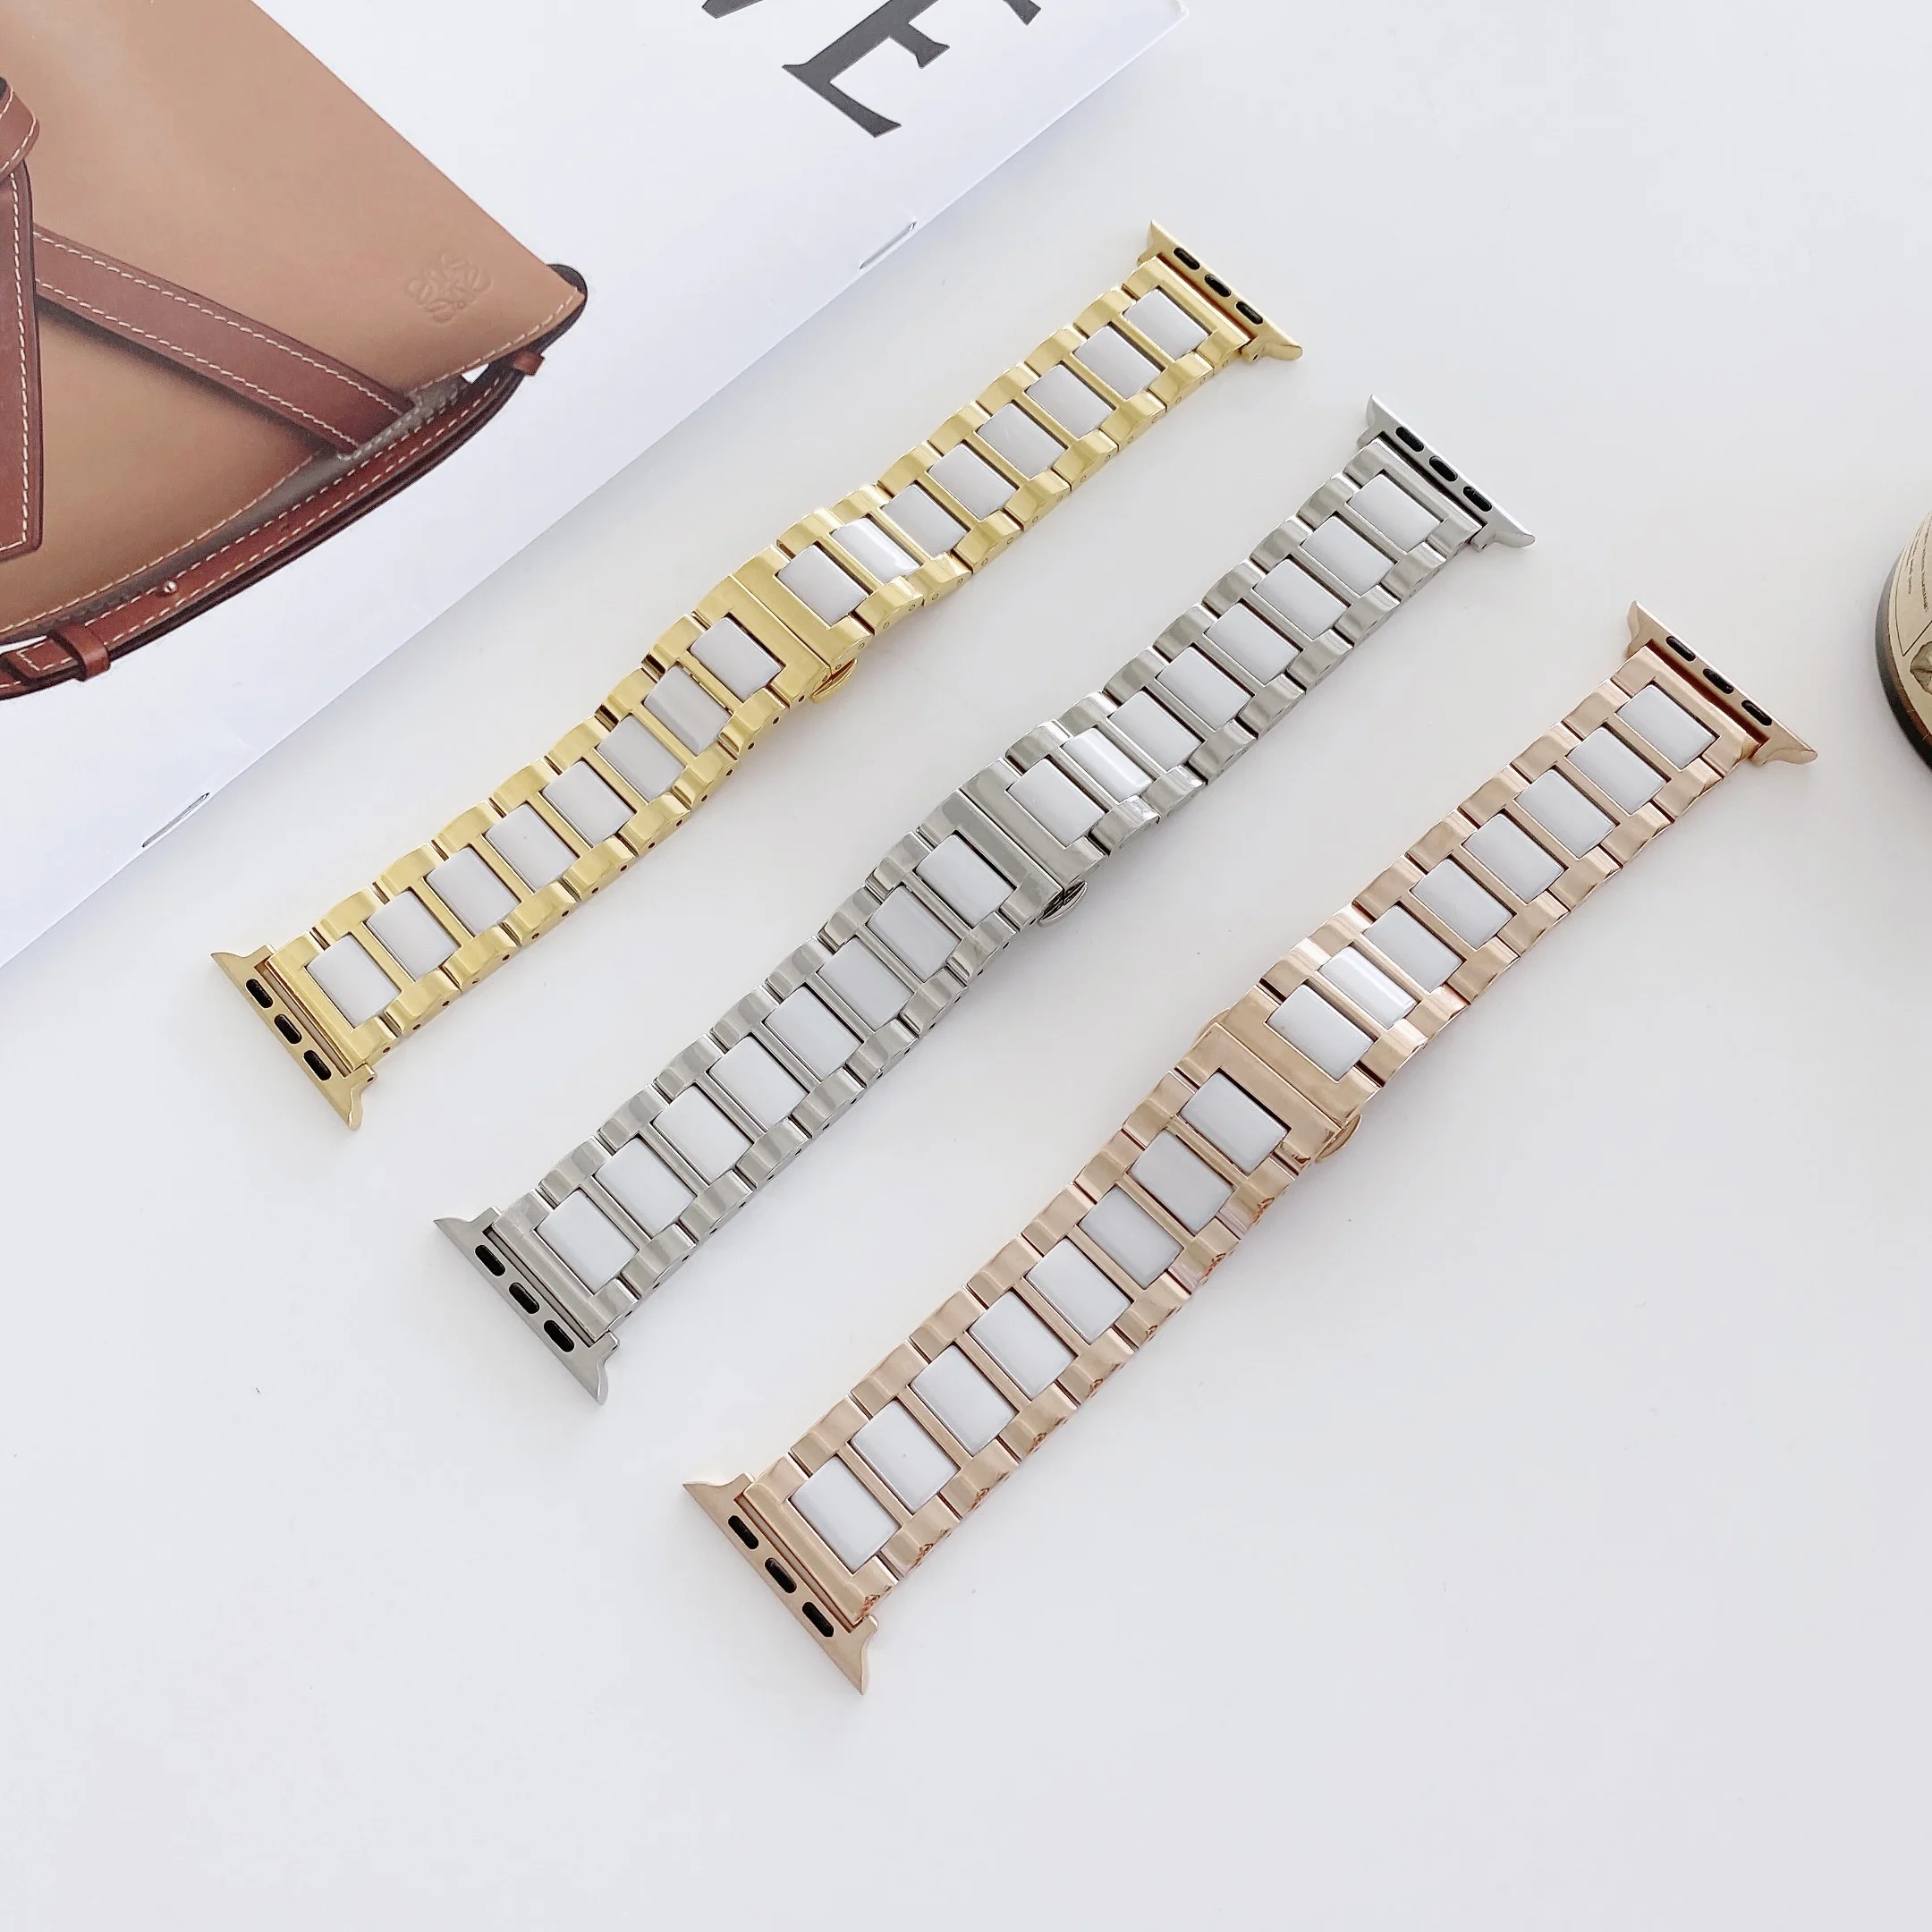 

Butterfly buckle ceramic three links stainless steel watch band strap for Apple iWatch SE 1/2/3/4/5/6 Series